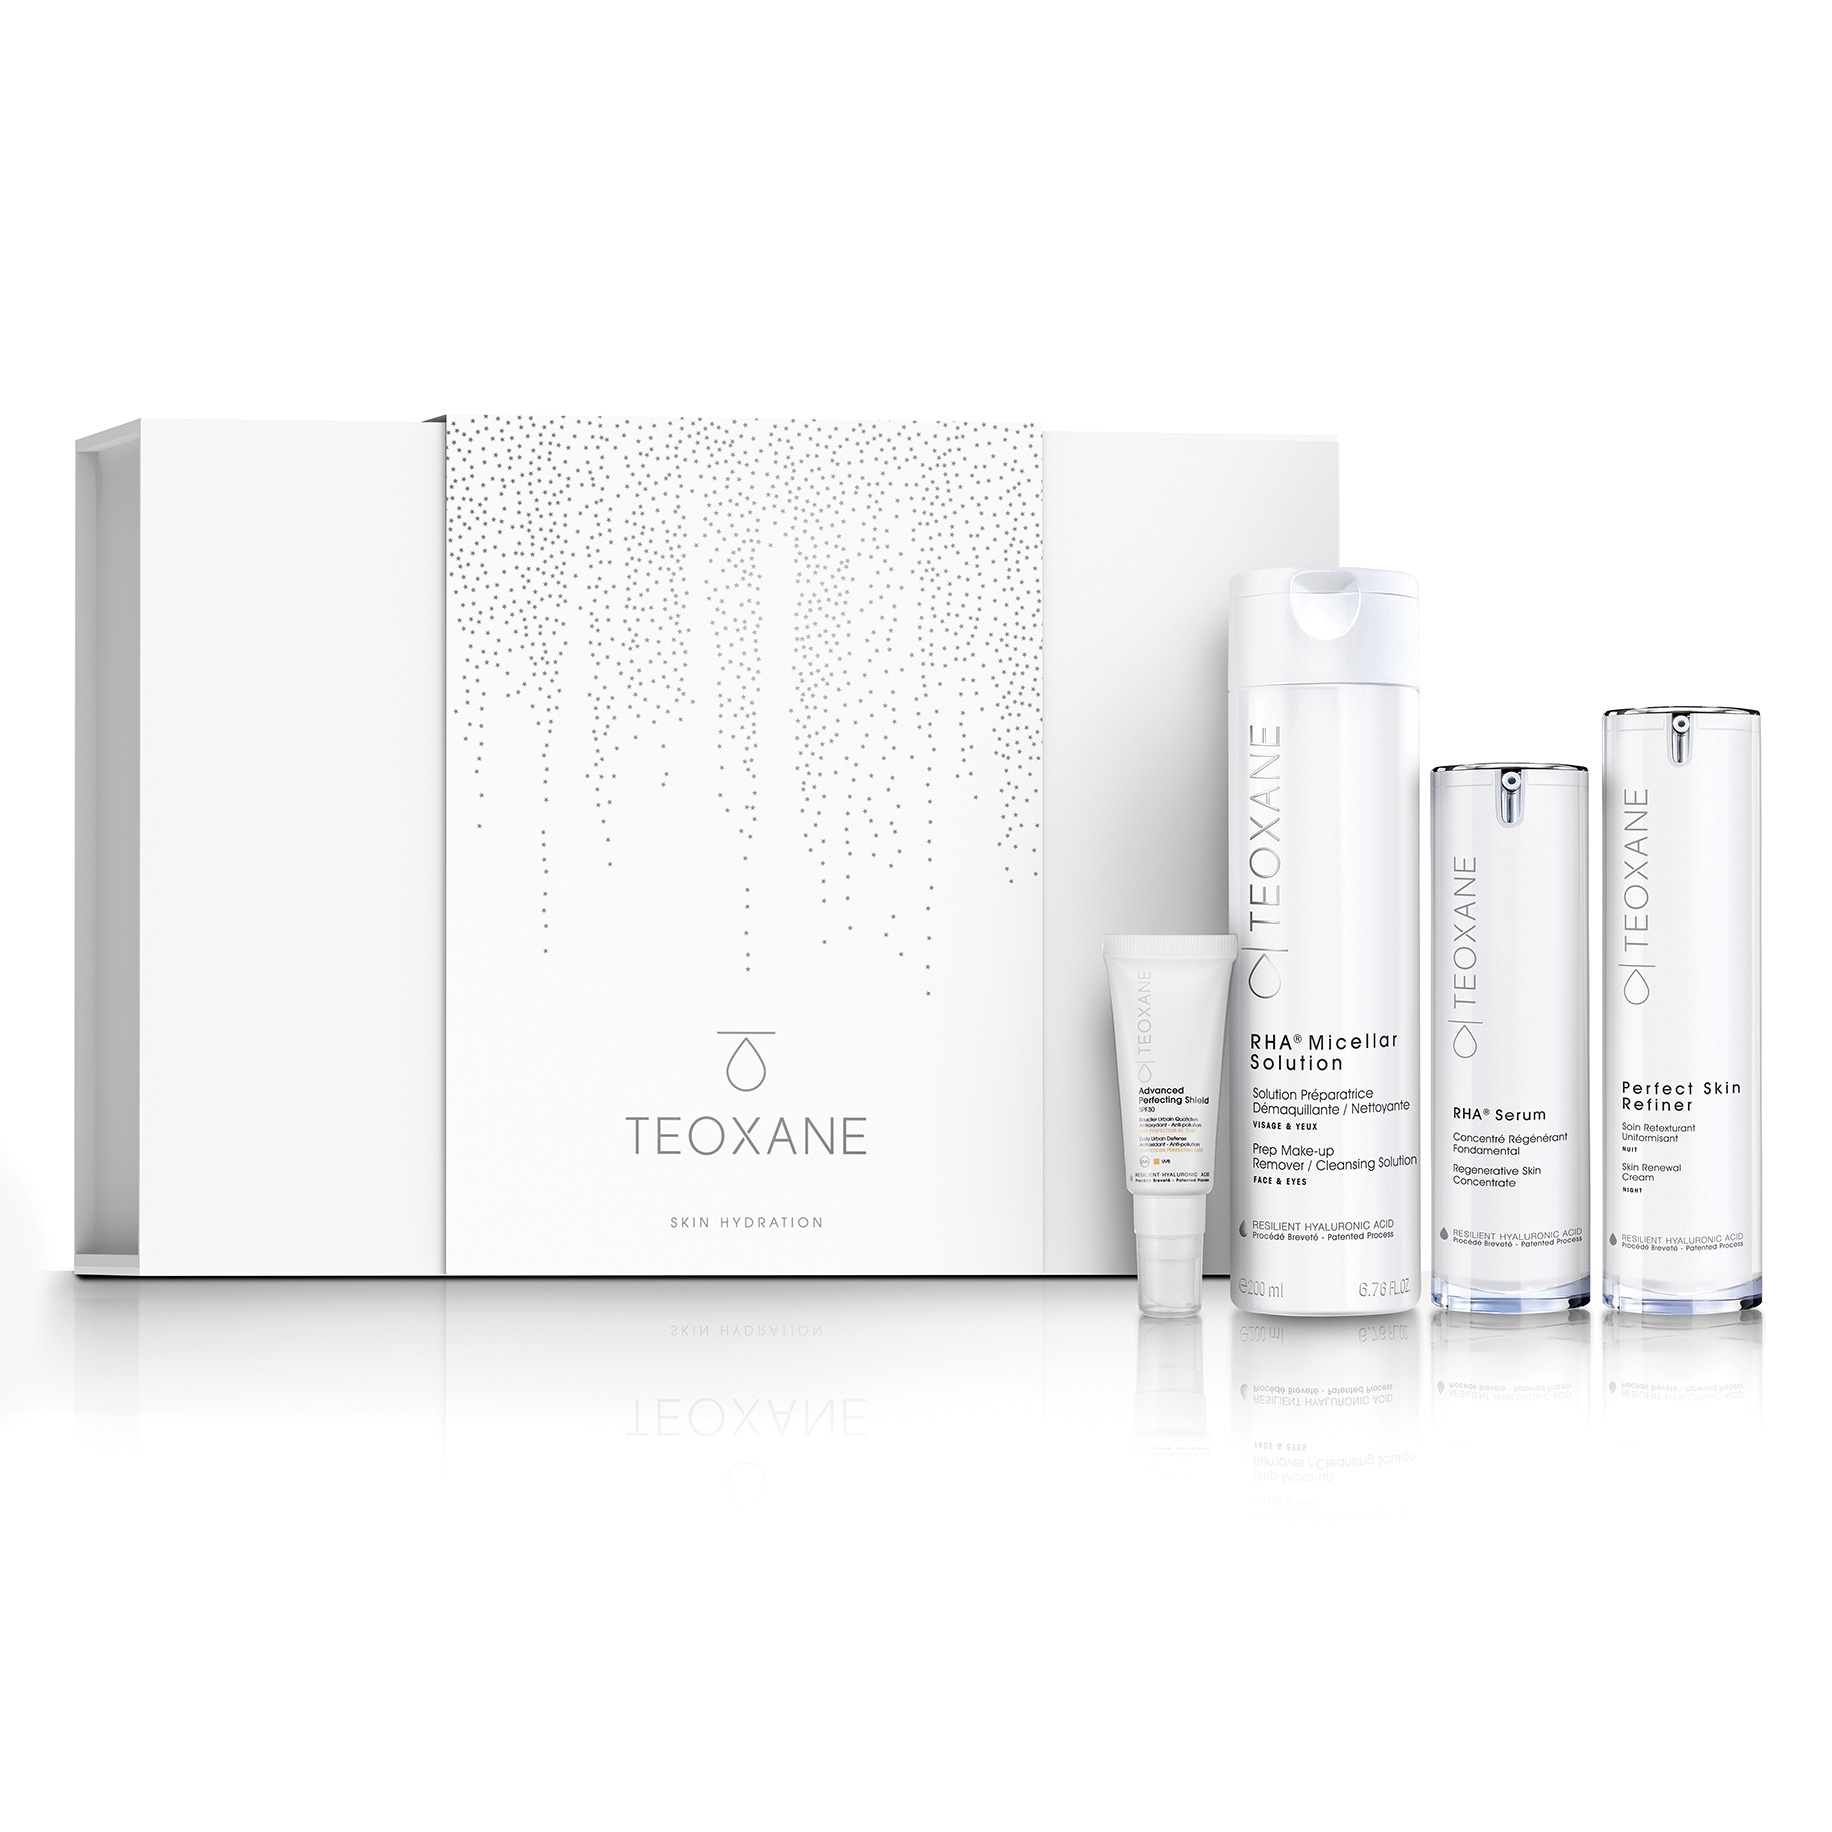 Teoxane Skin Hydration - Gift Collection 